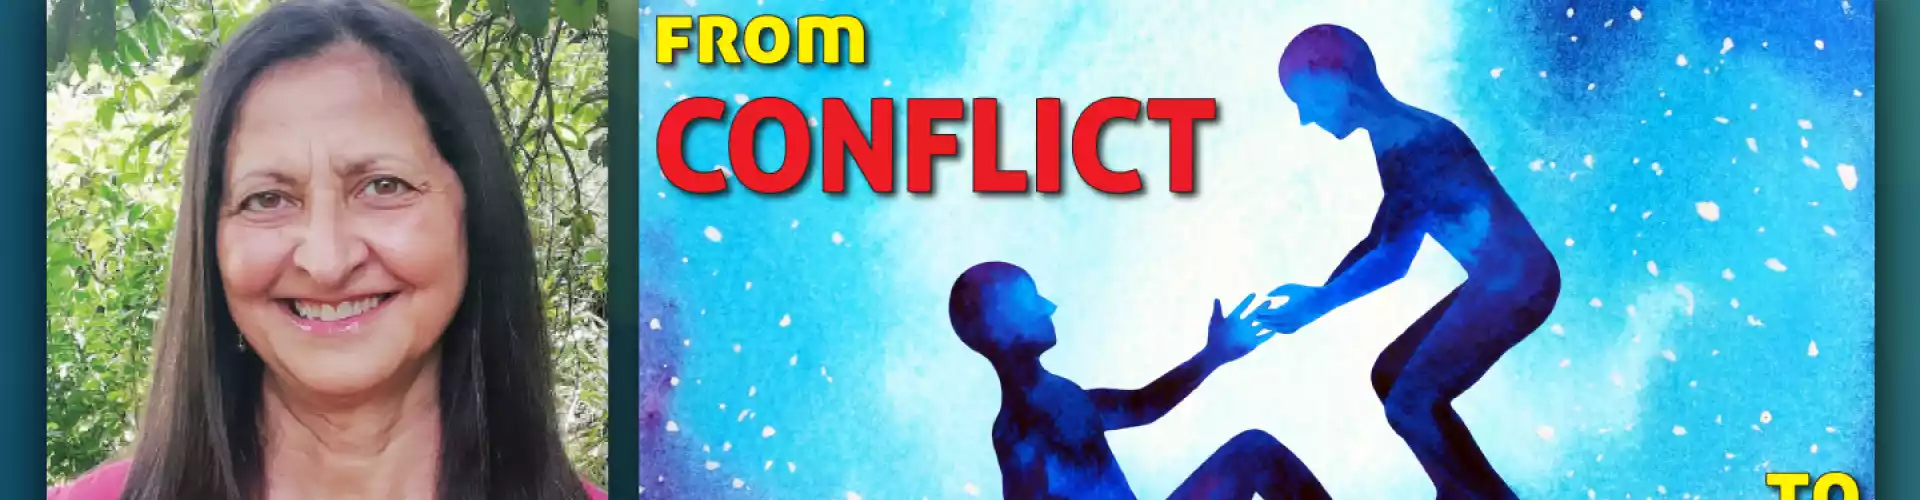 LMTV #222: From Conflict to Connection (Marisa Ferrera)